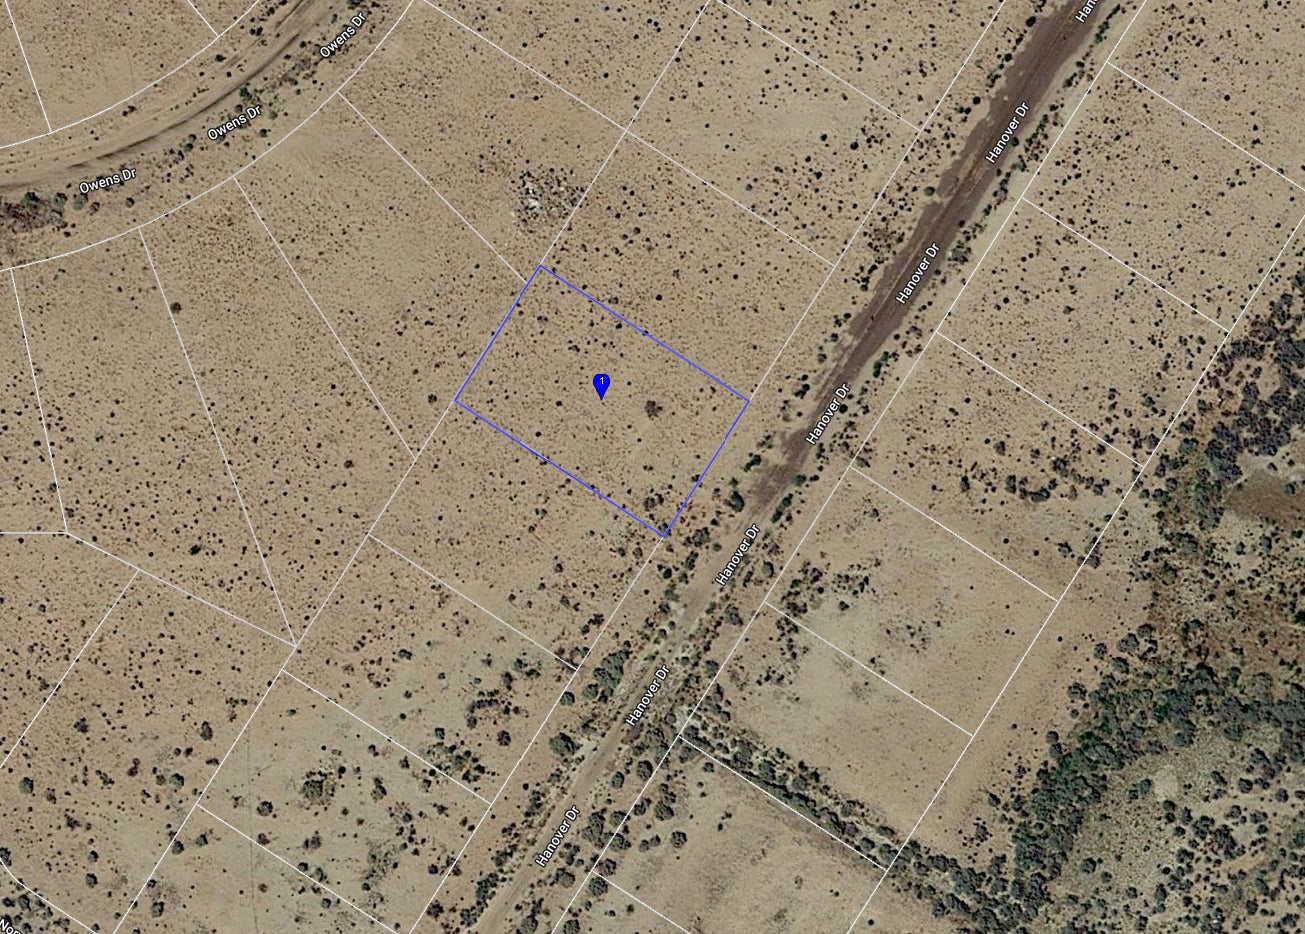 #L40082-1 .23 Acre Residential lot in California City, Kern County, CA $8,999.00 ($136.20/Month)